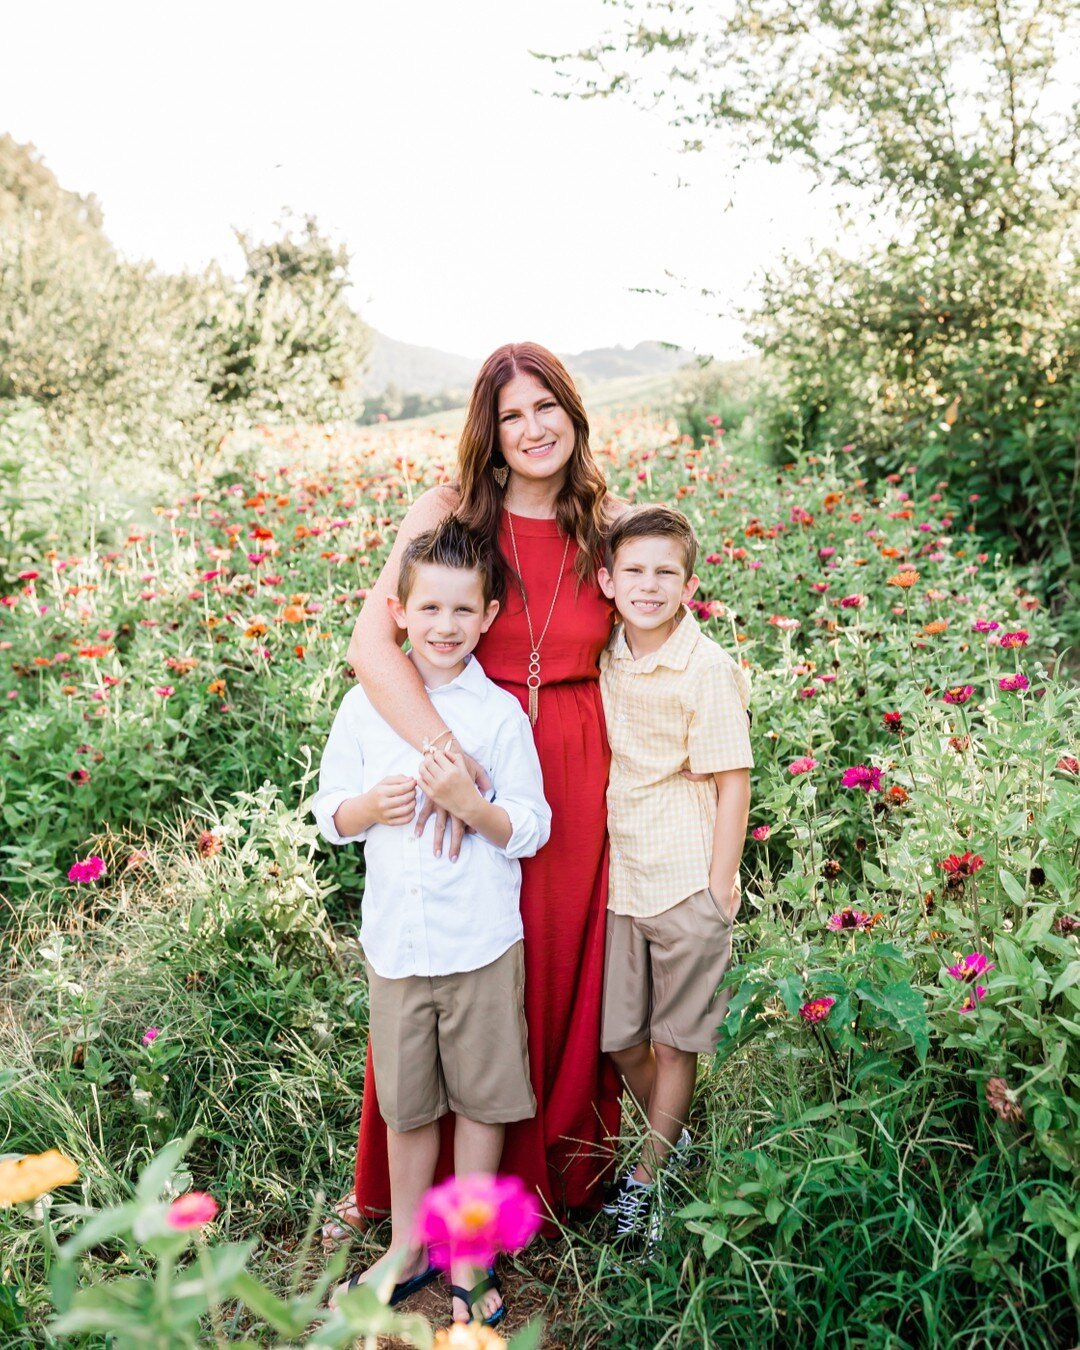 Happy Mother's Day! ​​​​​​​​​I'm so grateful to have a wonderful mother &amp; mother-in-law! They have been such wonderful examples! 
and I'm so blessed beyond words, that God trusted me with these two sweet boys! 

First photo by @joywildflowerphoto